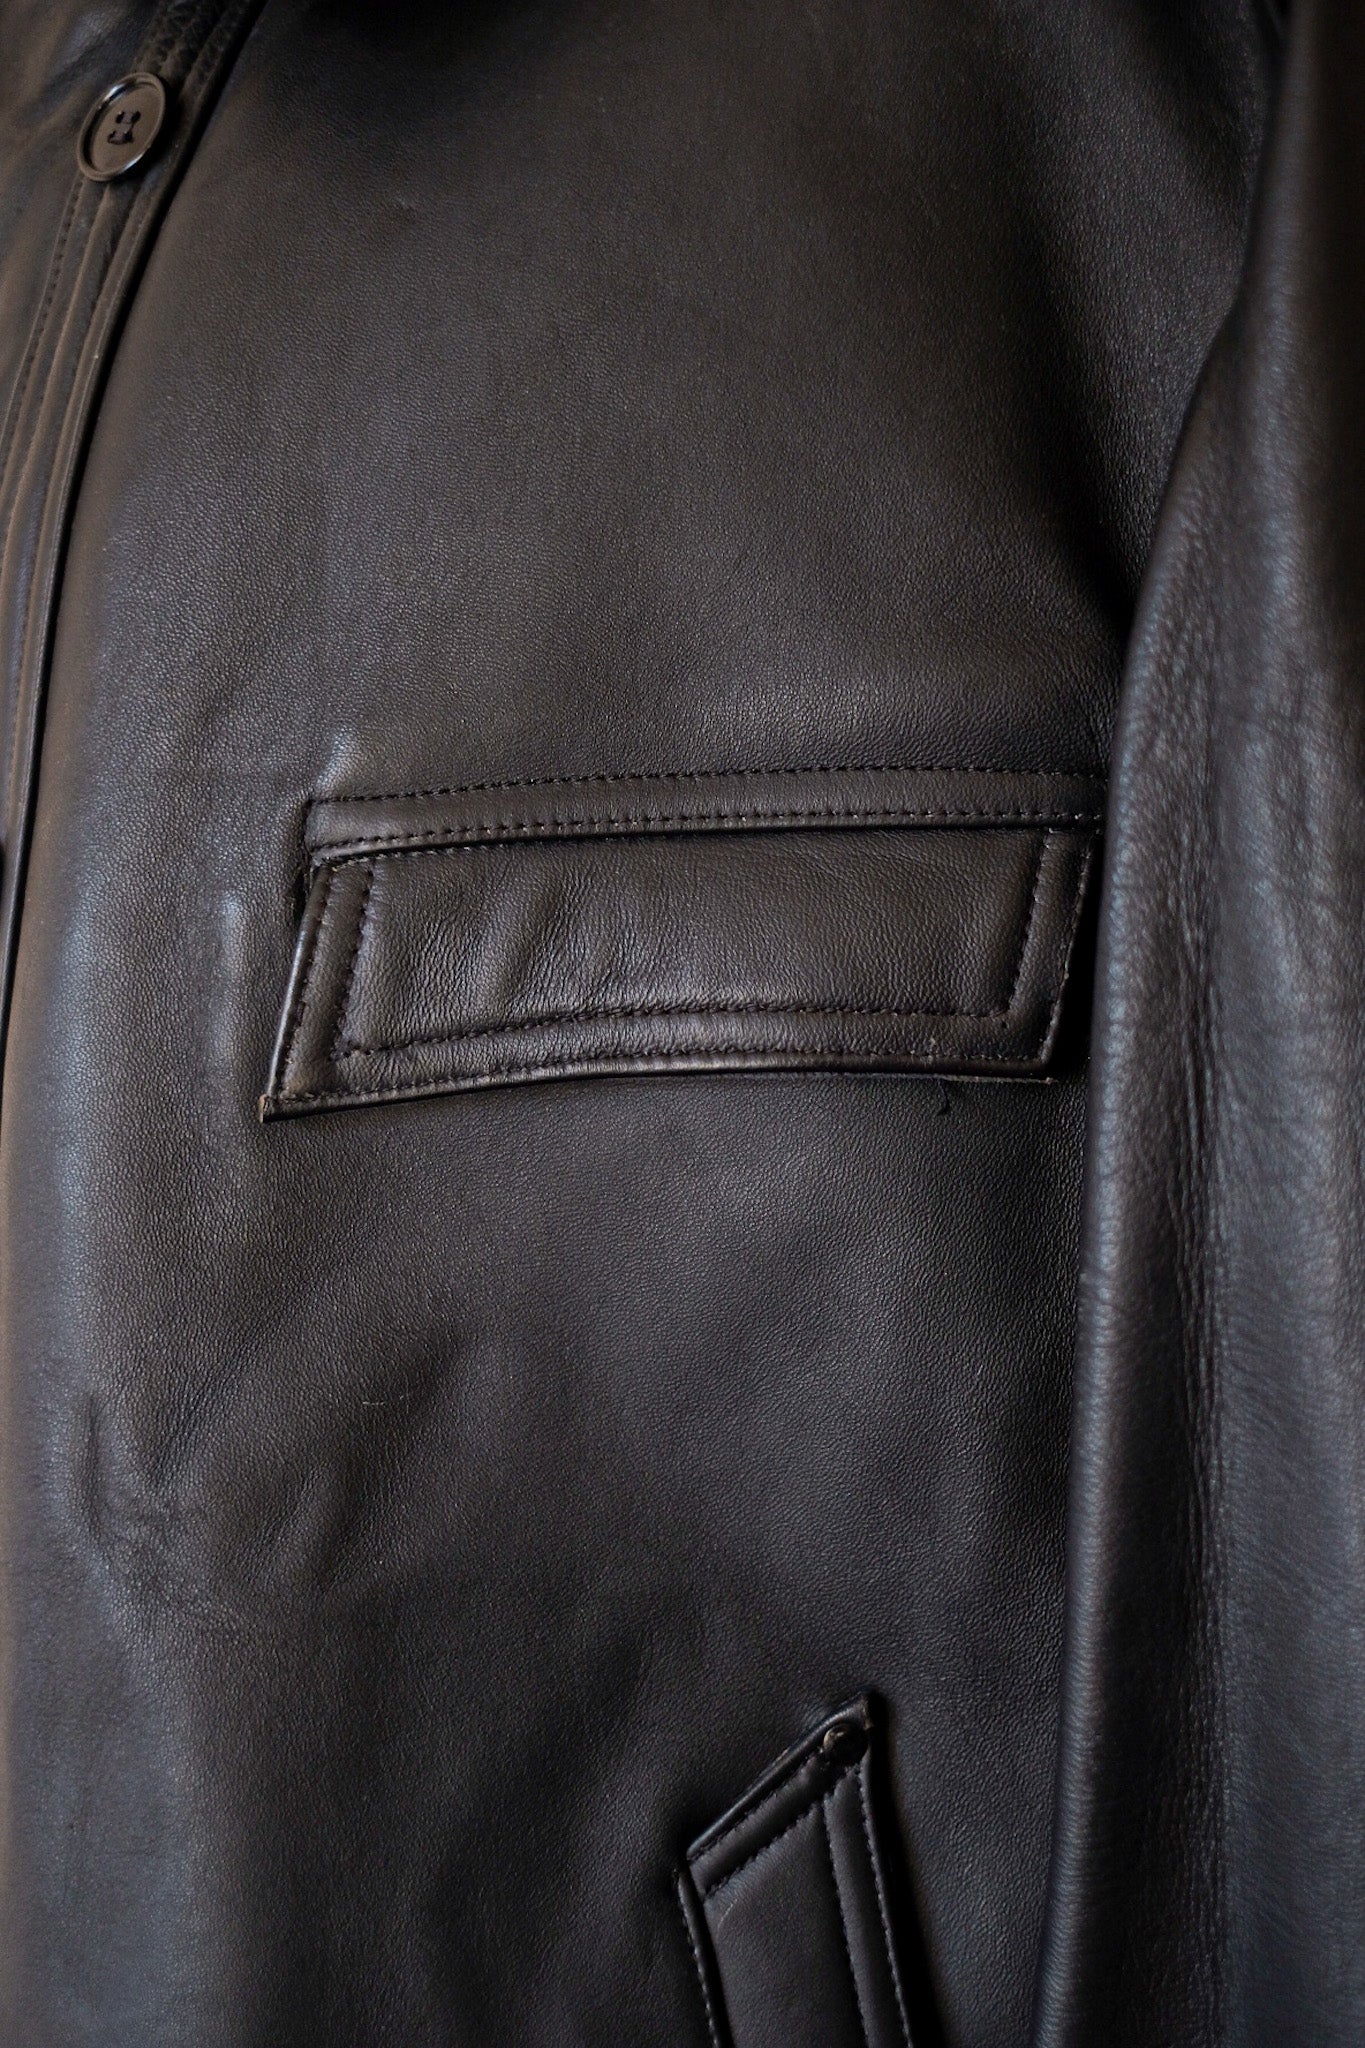 【~50's】French Vintage Le Corbusier Leather Work Jacket "Wool Collar" "Dead Stock"